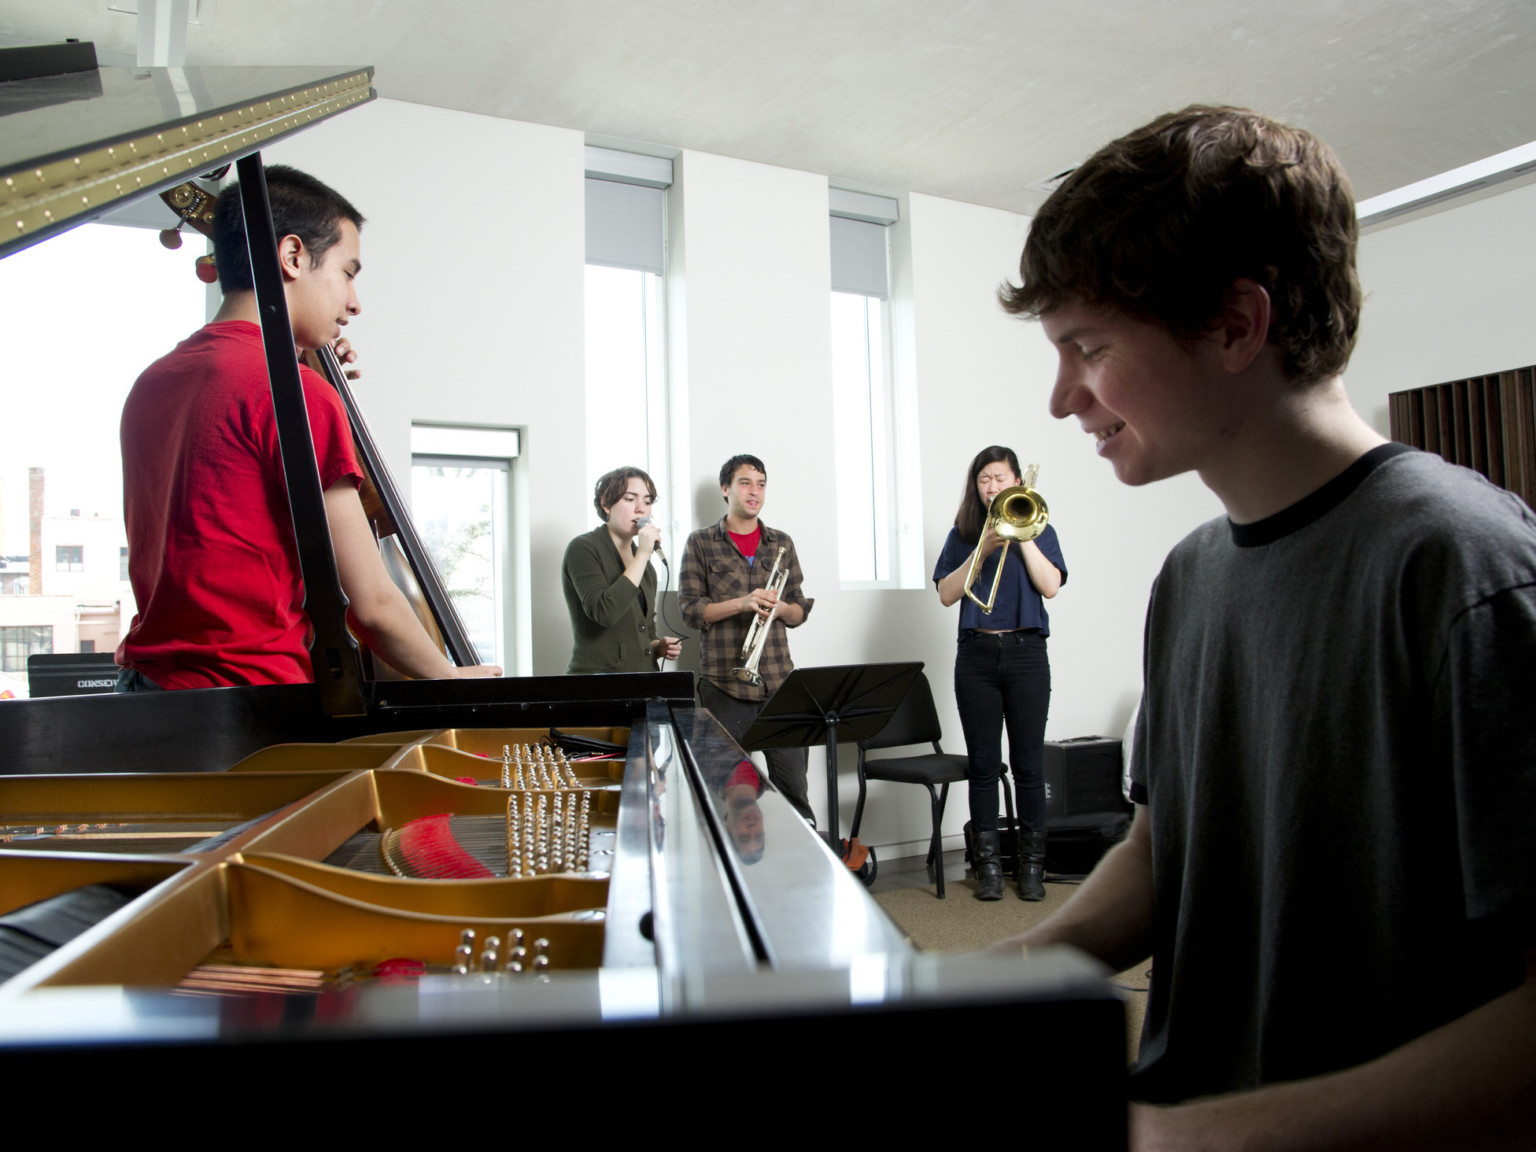 Musicians play in white room with 4 tall, thin rectangular windows with light coming through